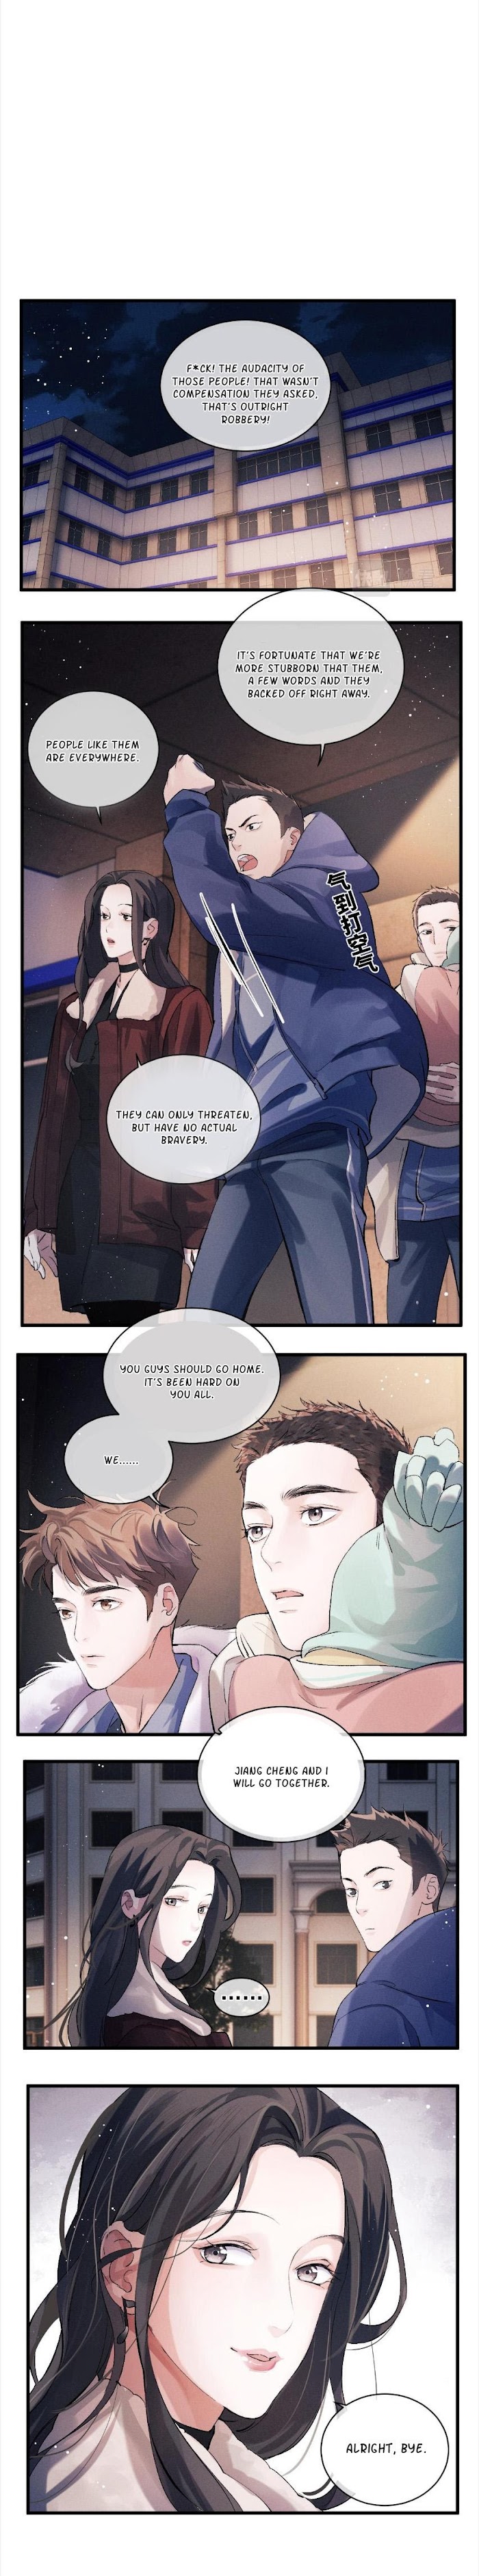 Run Freely - Page 3